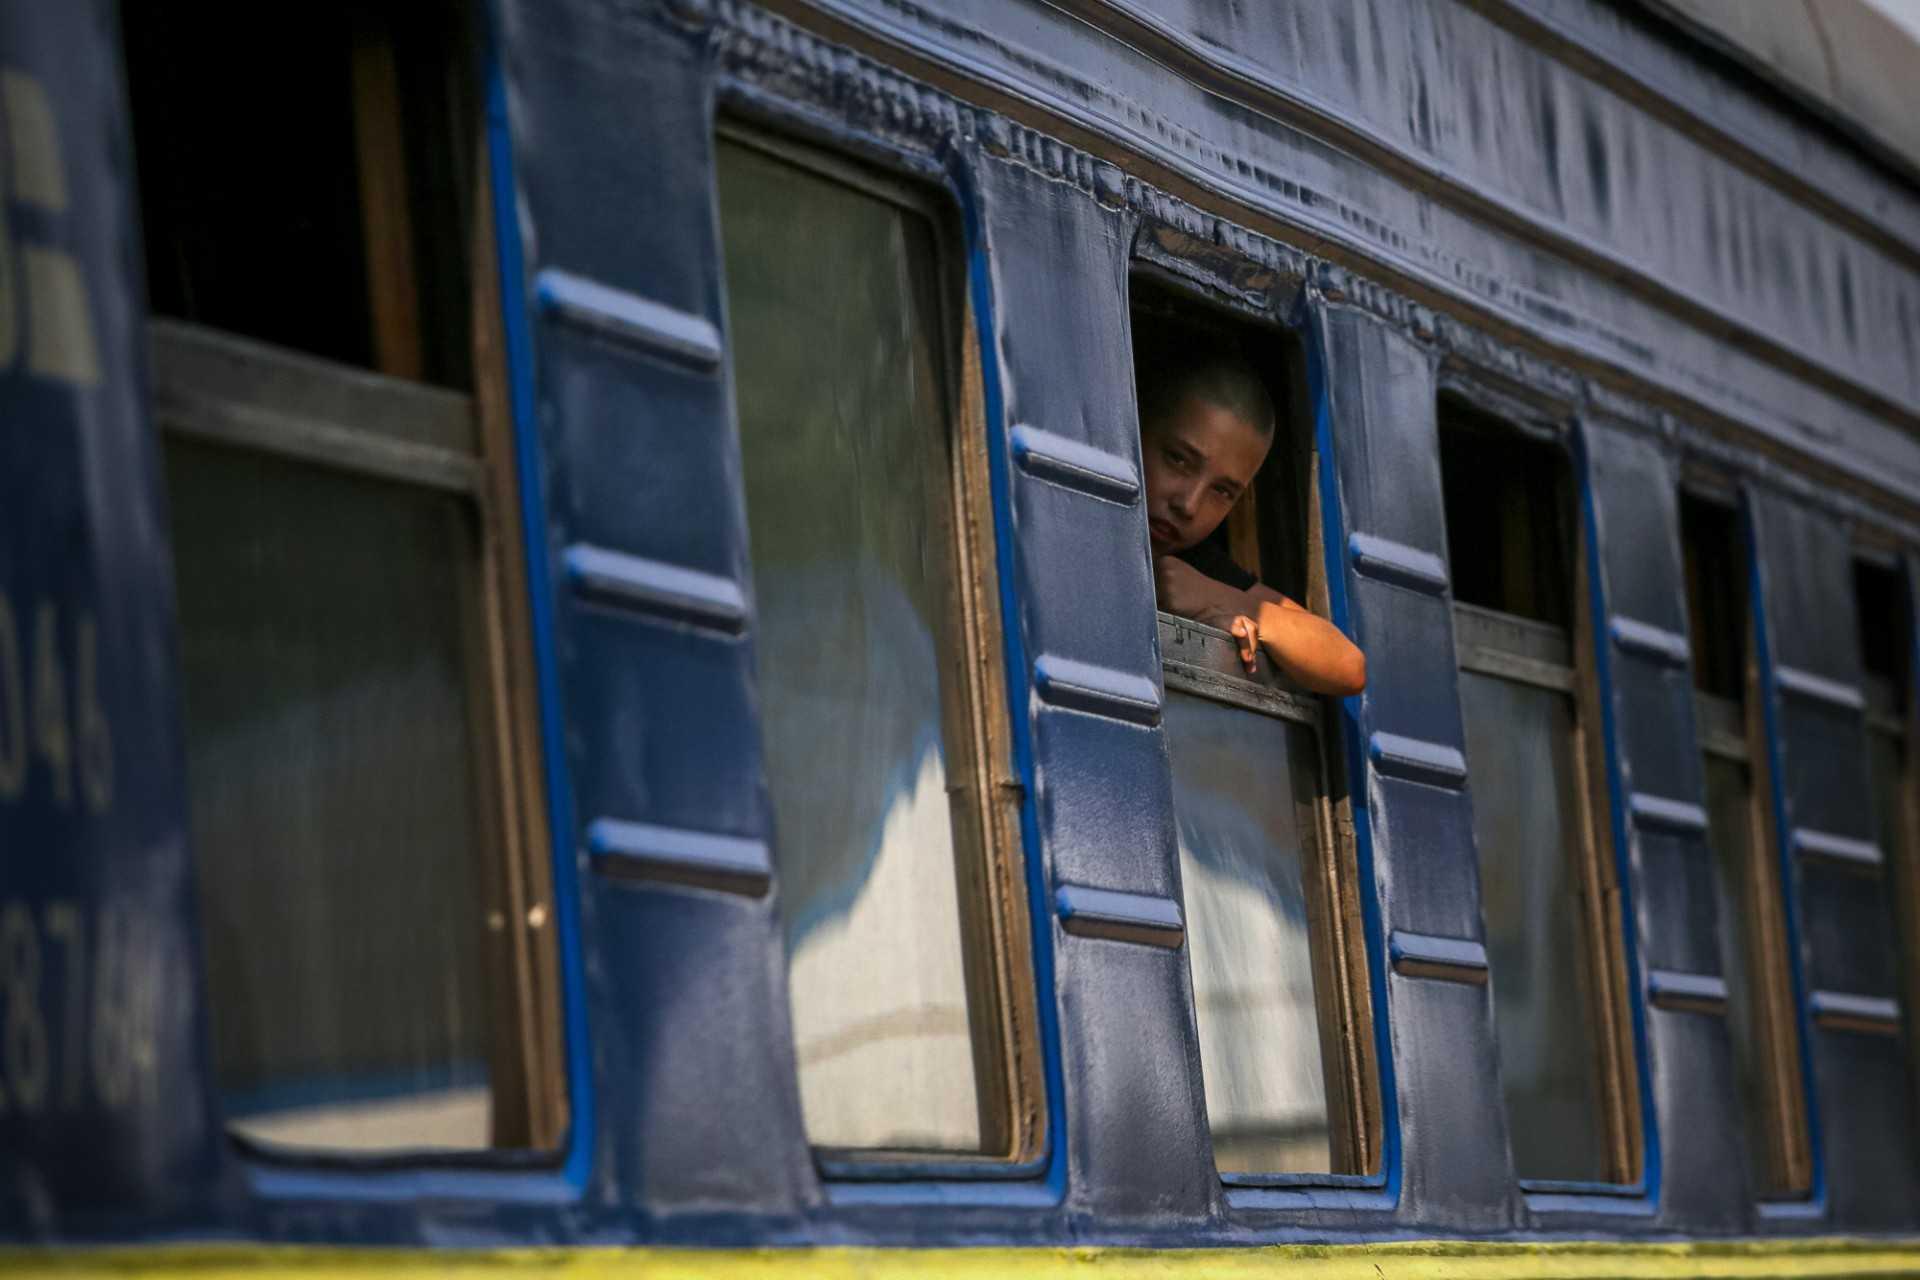 A boy looks out of the window of an evacuation train from the Donbas region to the west of Ukraine, in the train station of Udachnoye, on Aug 16, amid the Russian invasion of Ukraine. Photo: AFP